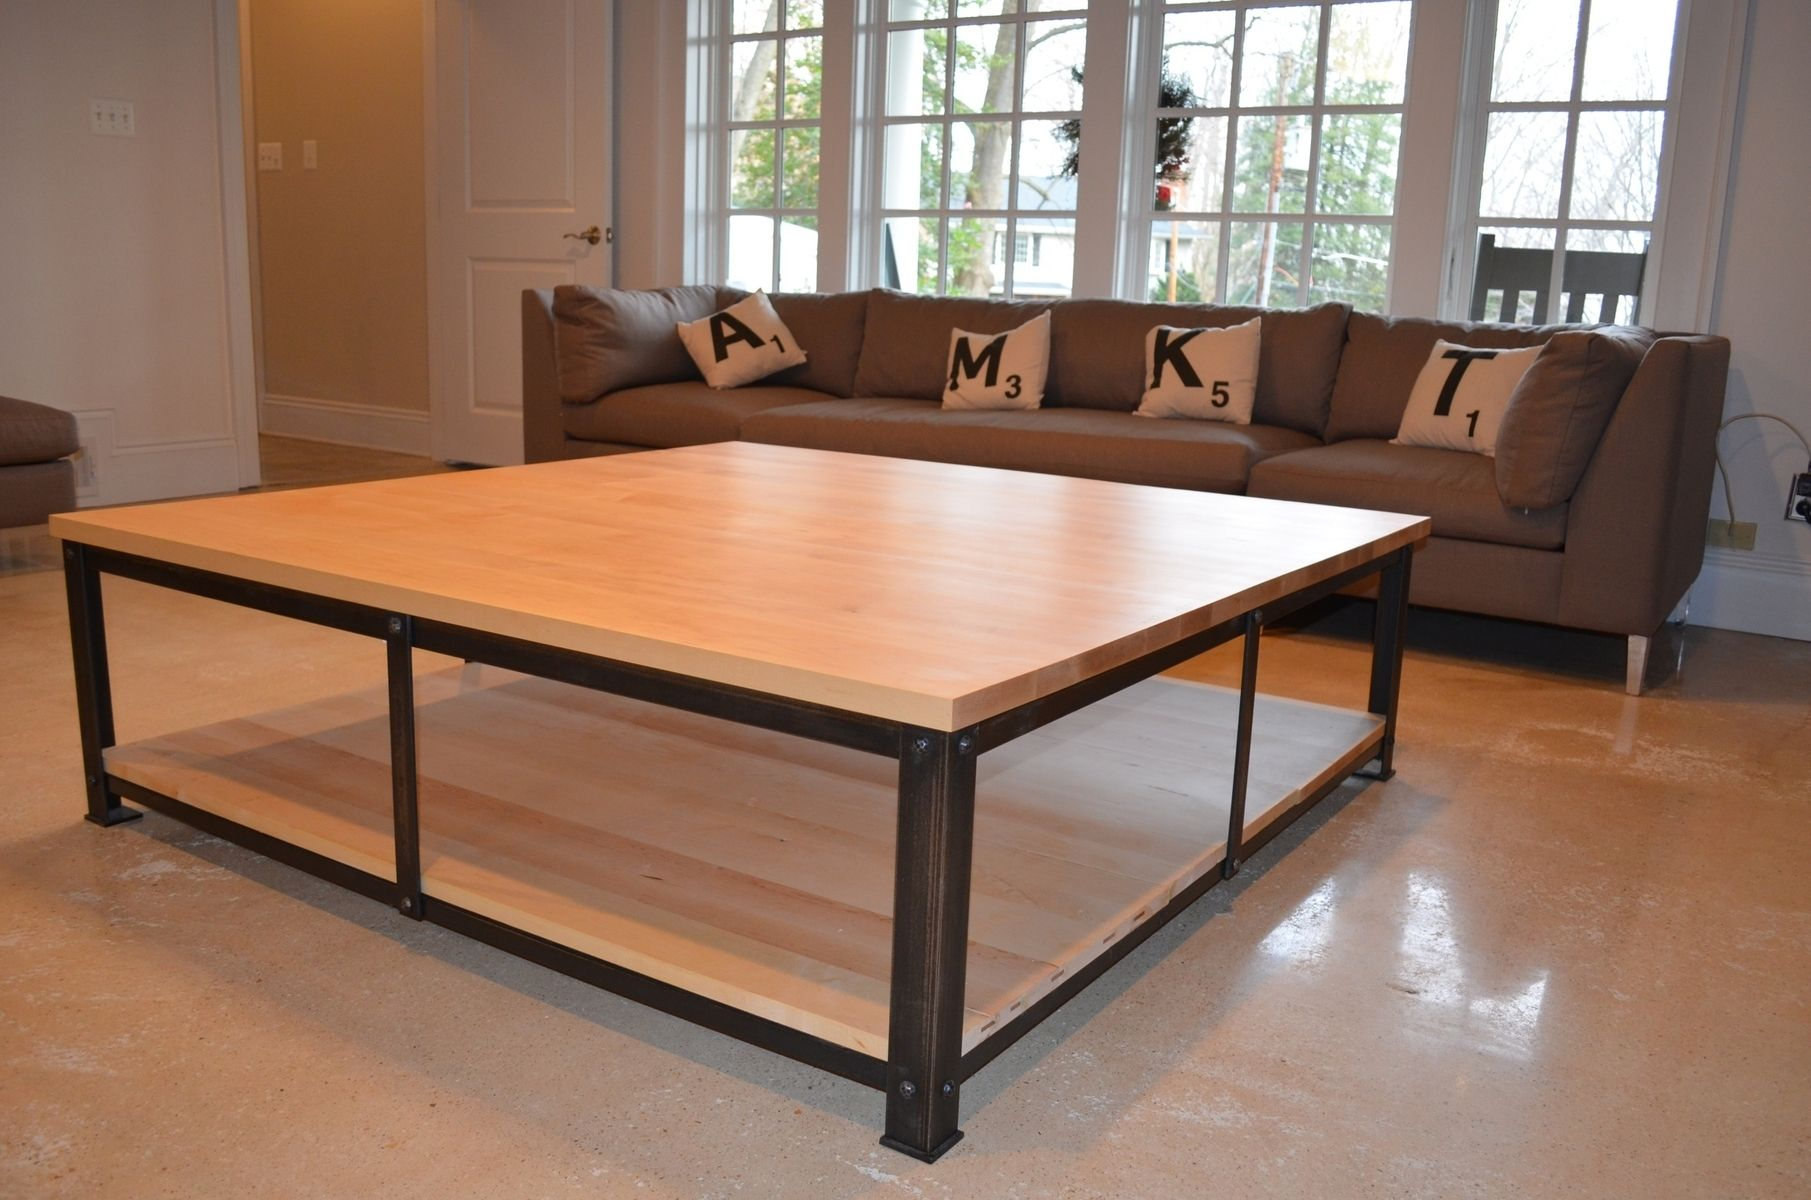 60 Inch Square Coffee Table Hipenmoedernl throughout sizing 1811 X 1200